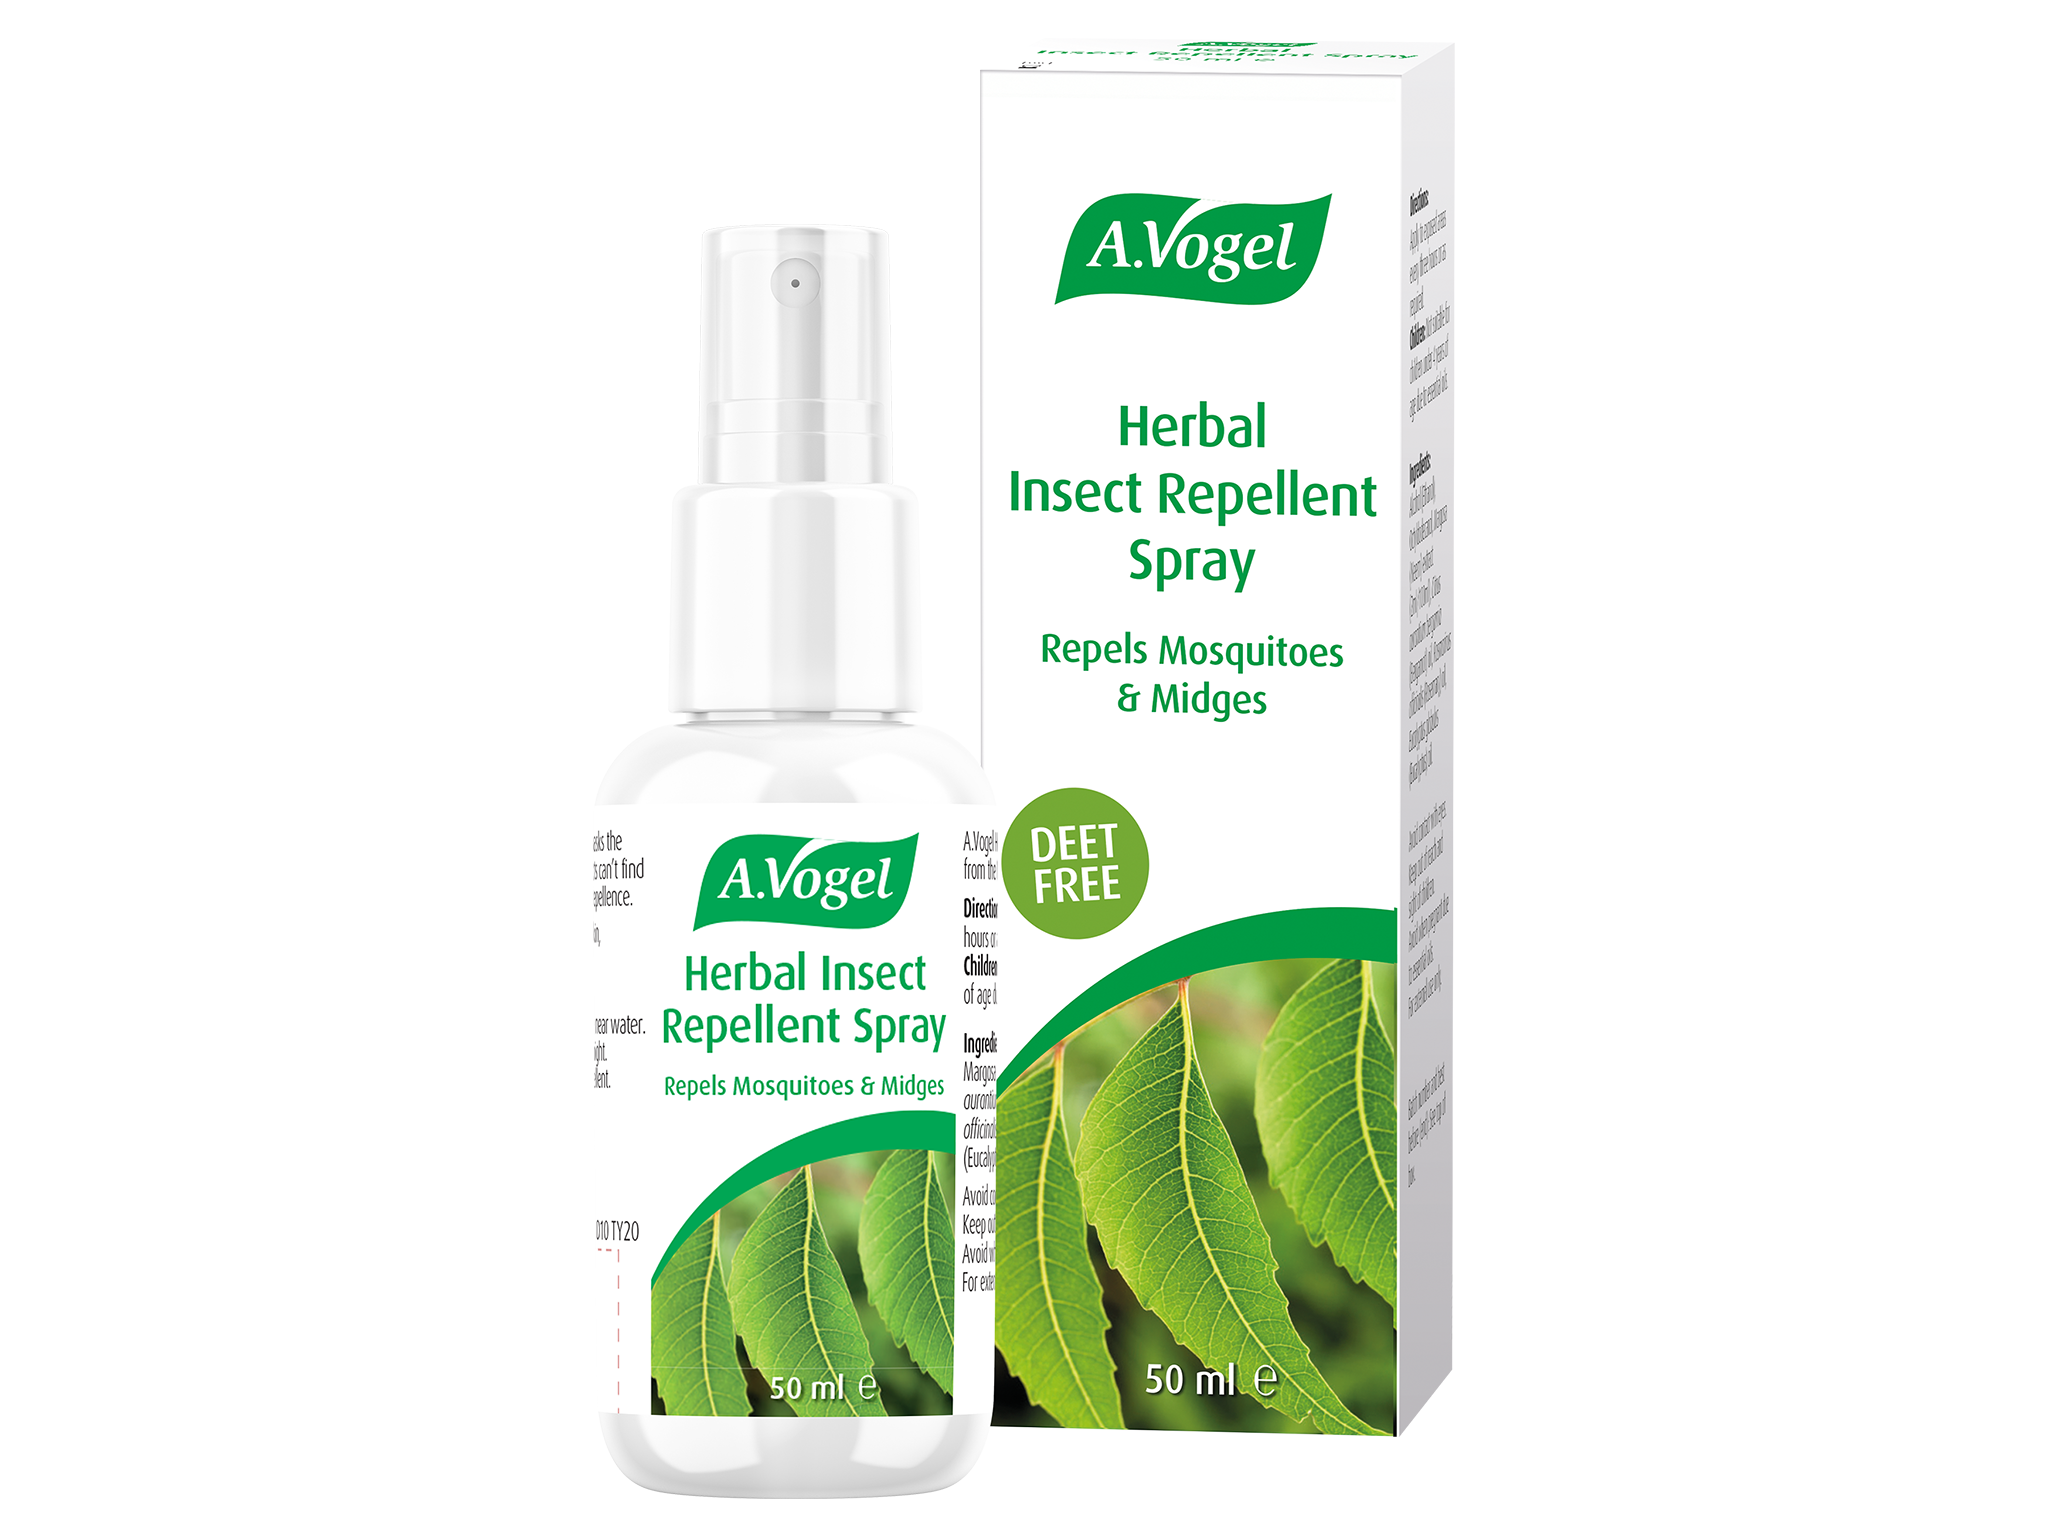 A.Vogel neem insect repellent spray